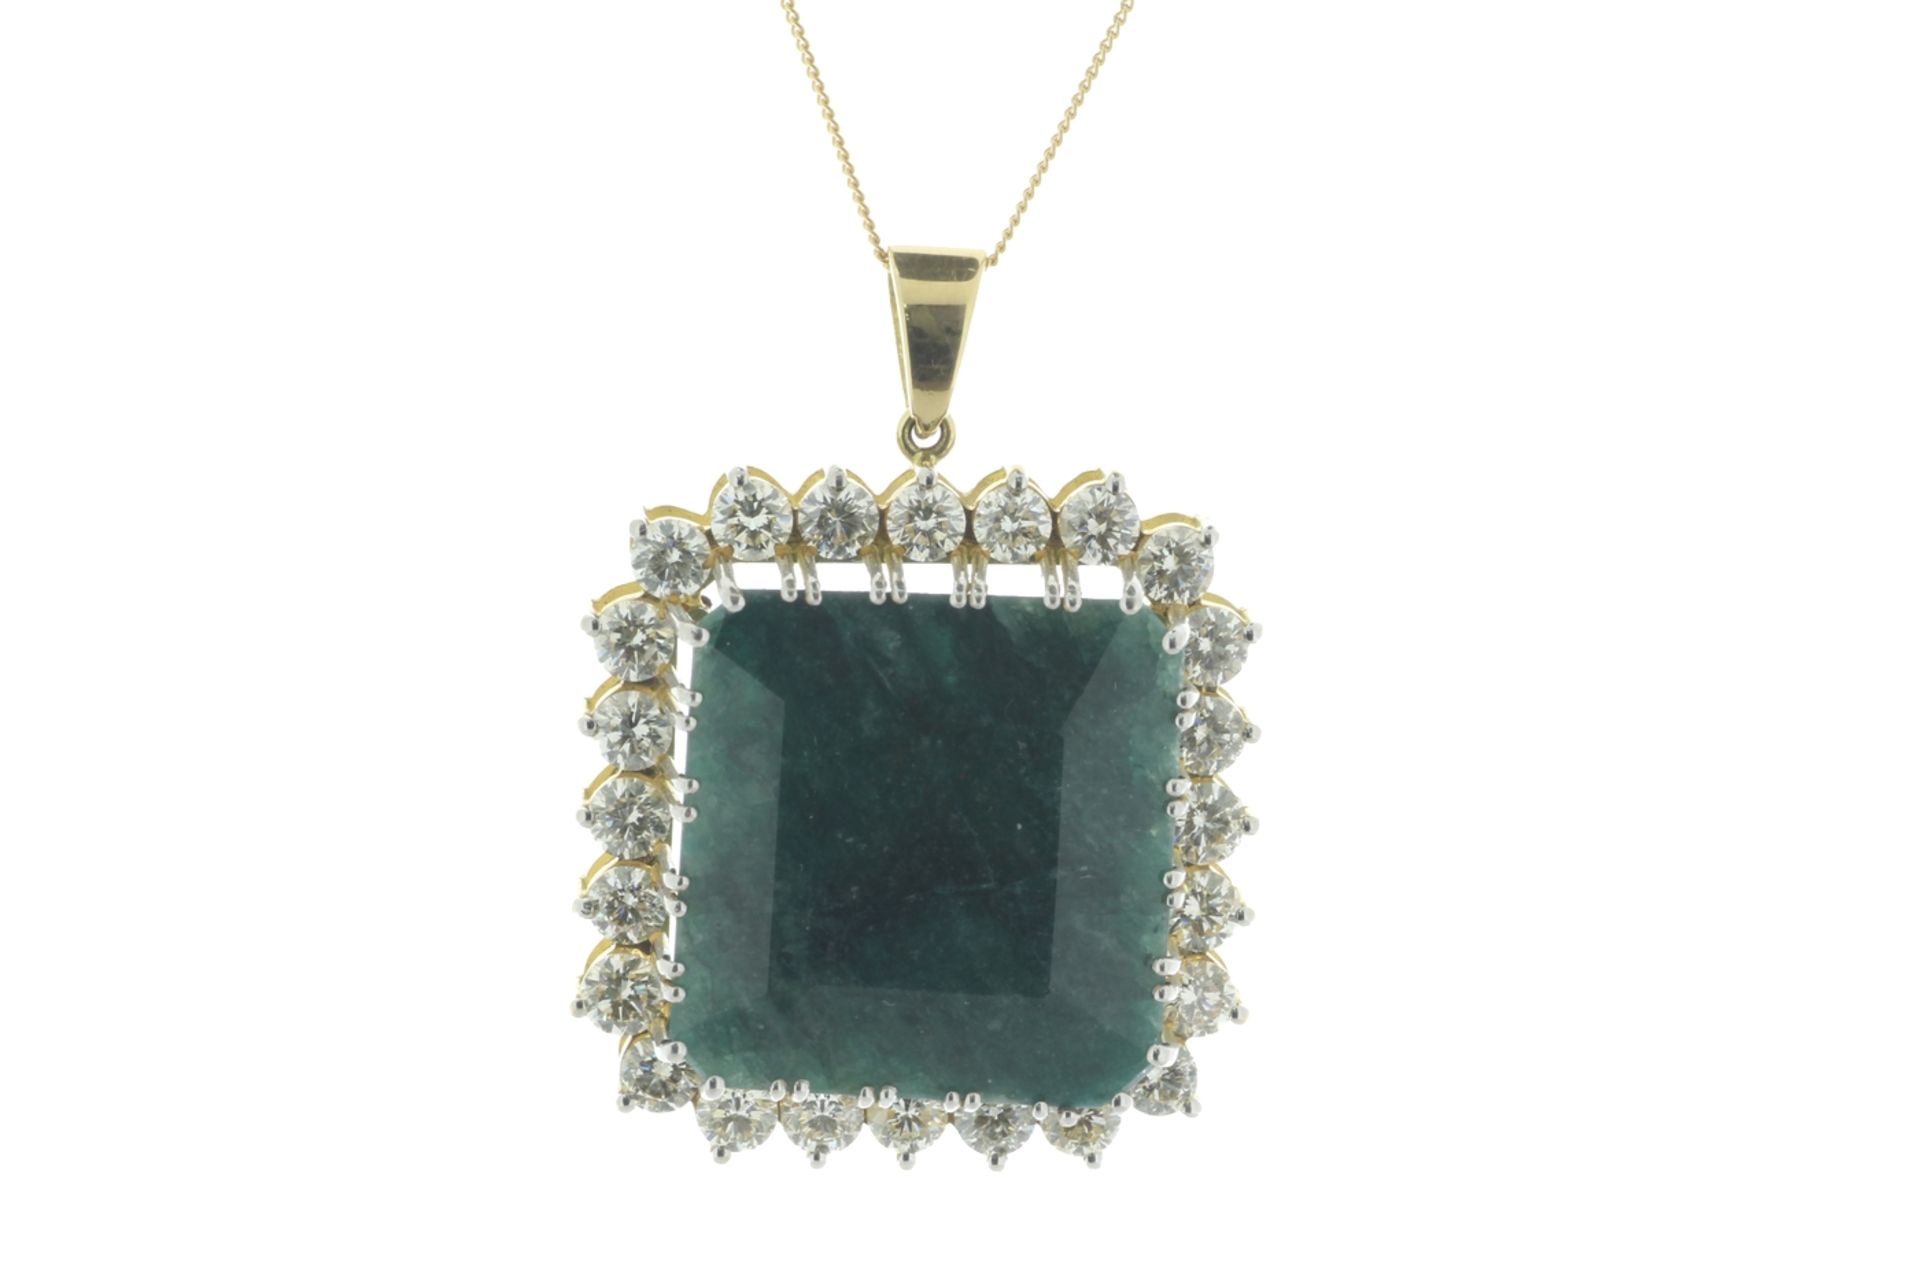 18ct Yellow Gold Single Stone With Halo Setting And Emerald Pendant (E54.20) 4.73 Carats - Valued by